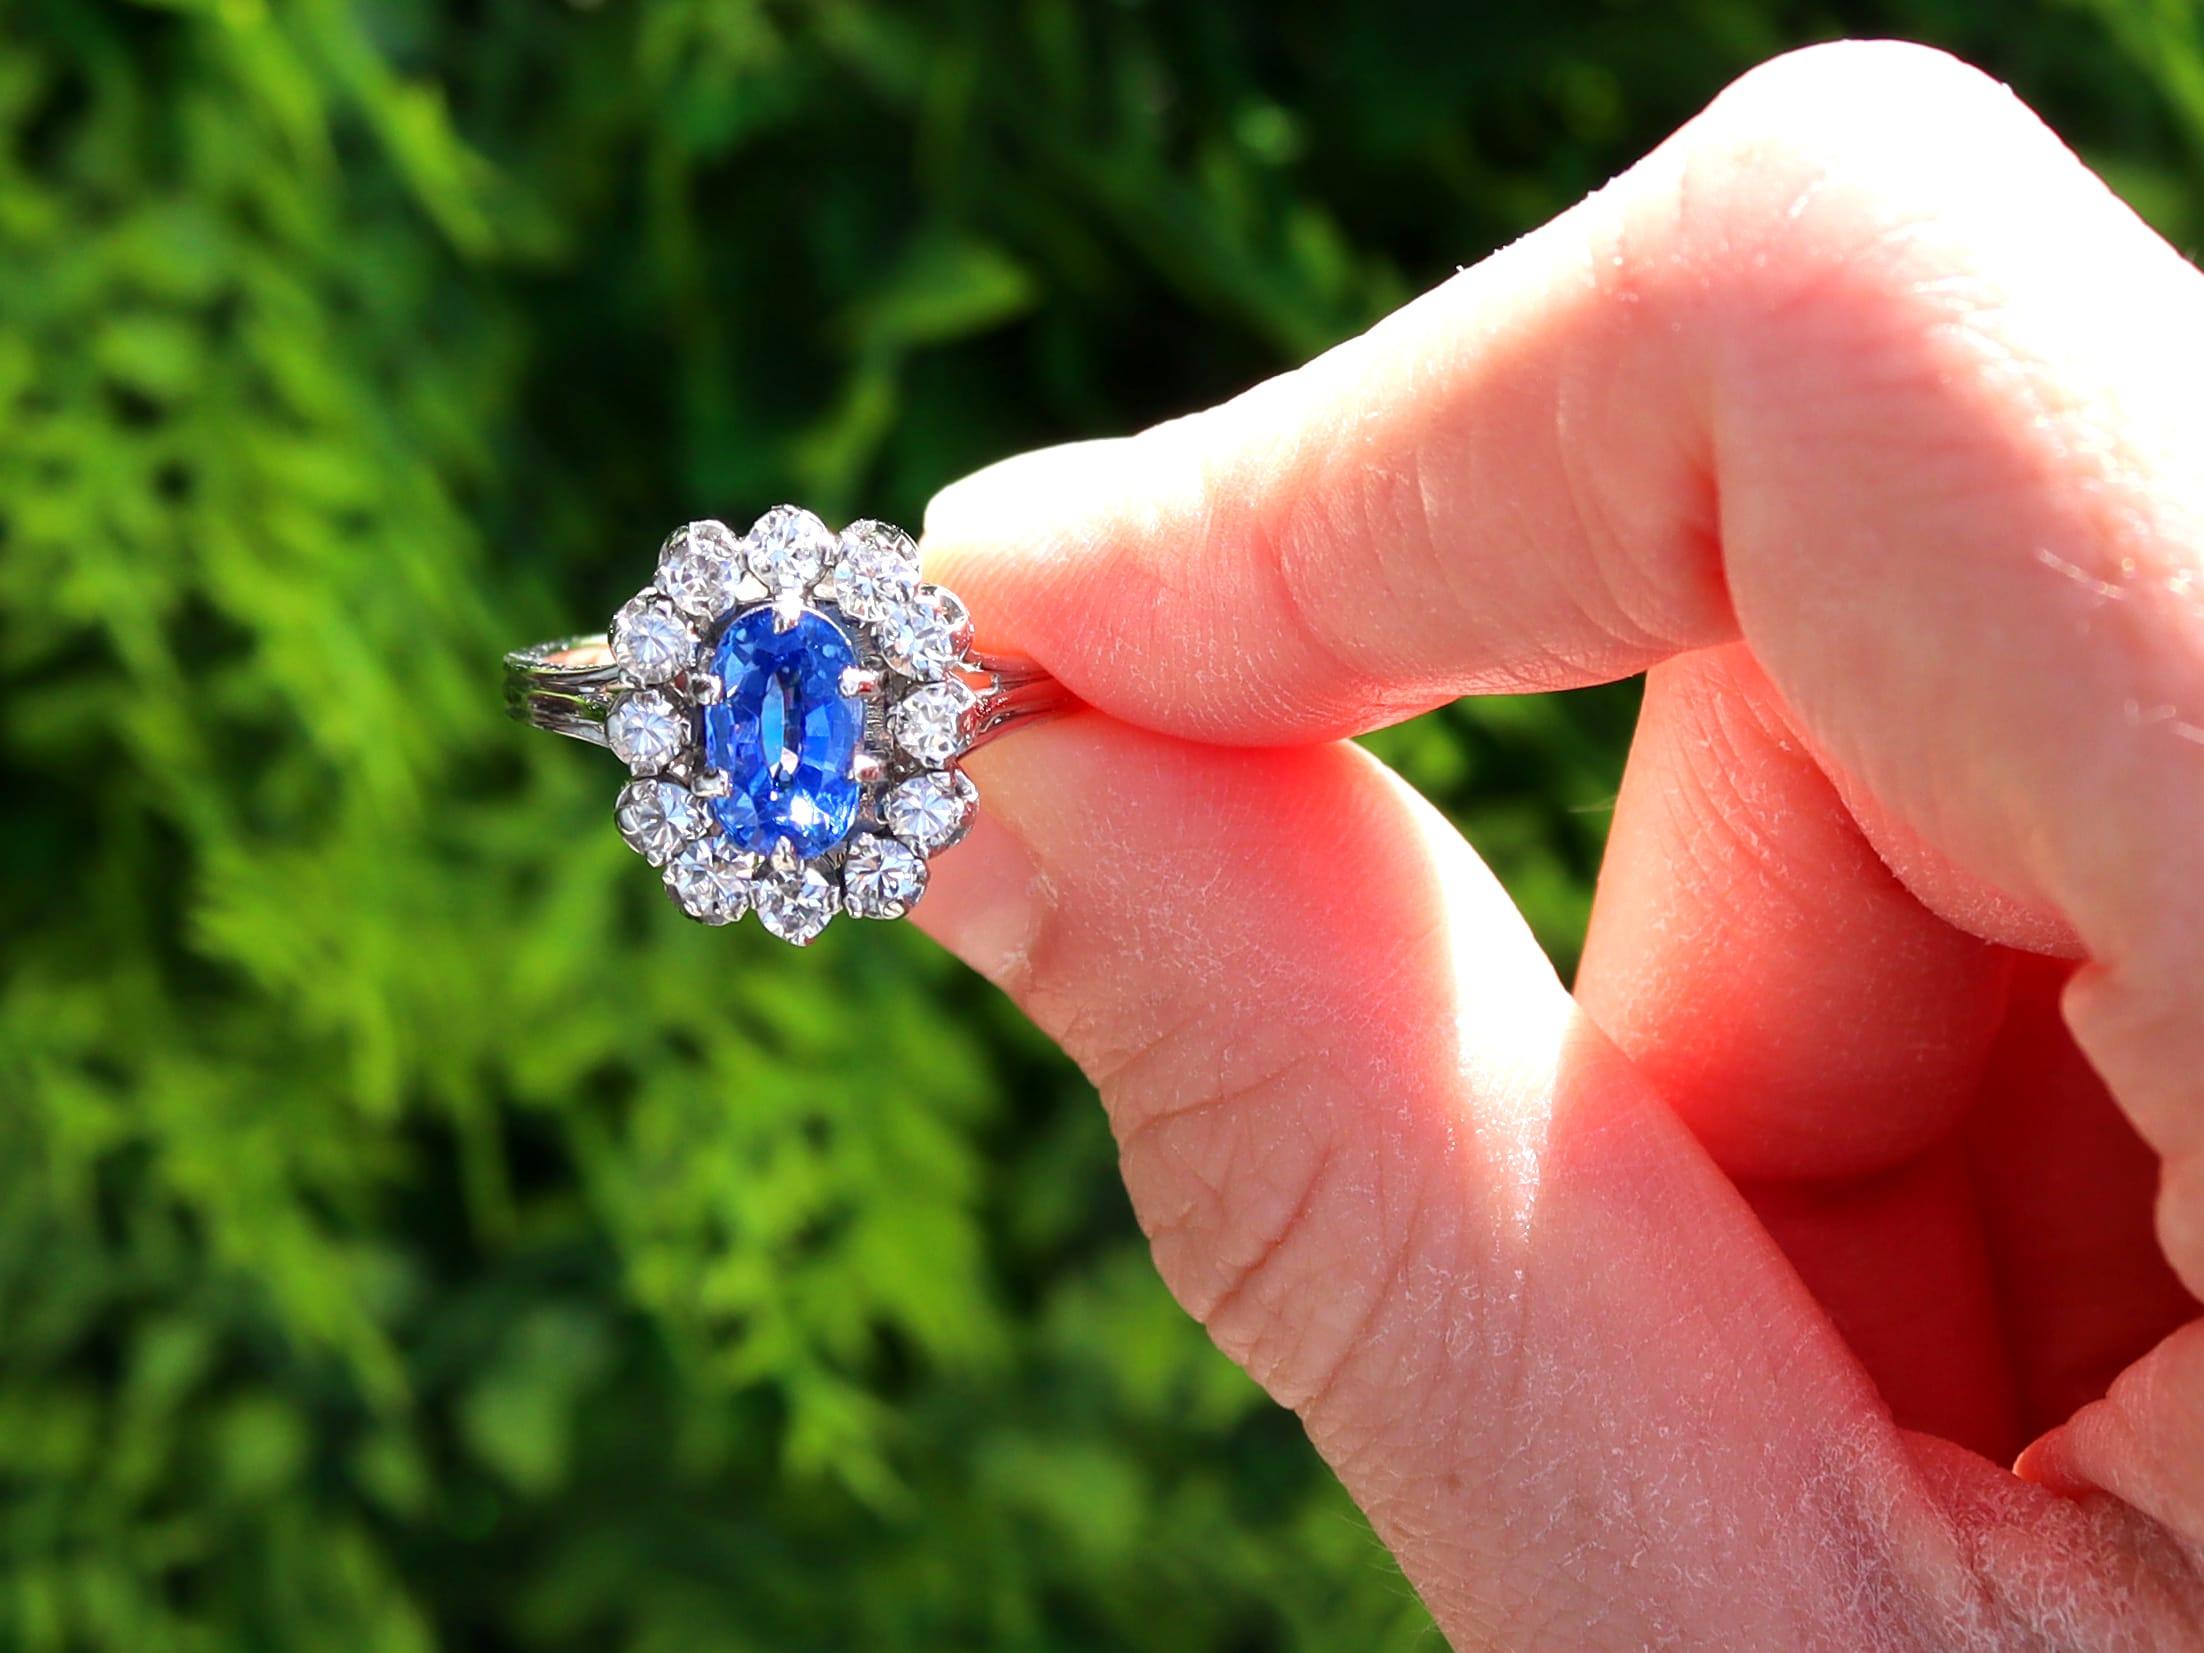 A stunning, fine and impressive vintage 2.36 carat Basaltic sapphire and 0.75 carat diamond, 18 karat white gold dress ring; part of our diverse oval cut engagement ring collections

This stunning, fine and impressive 1950s ring has been crafted in